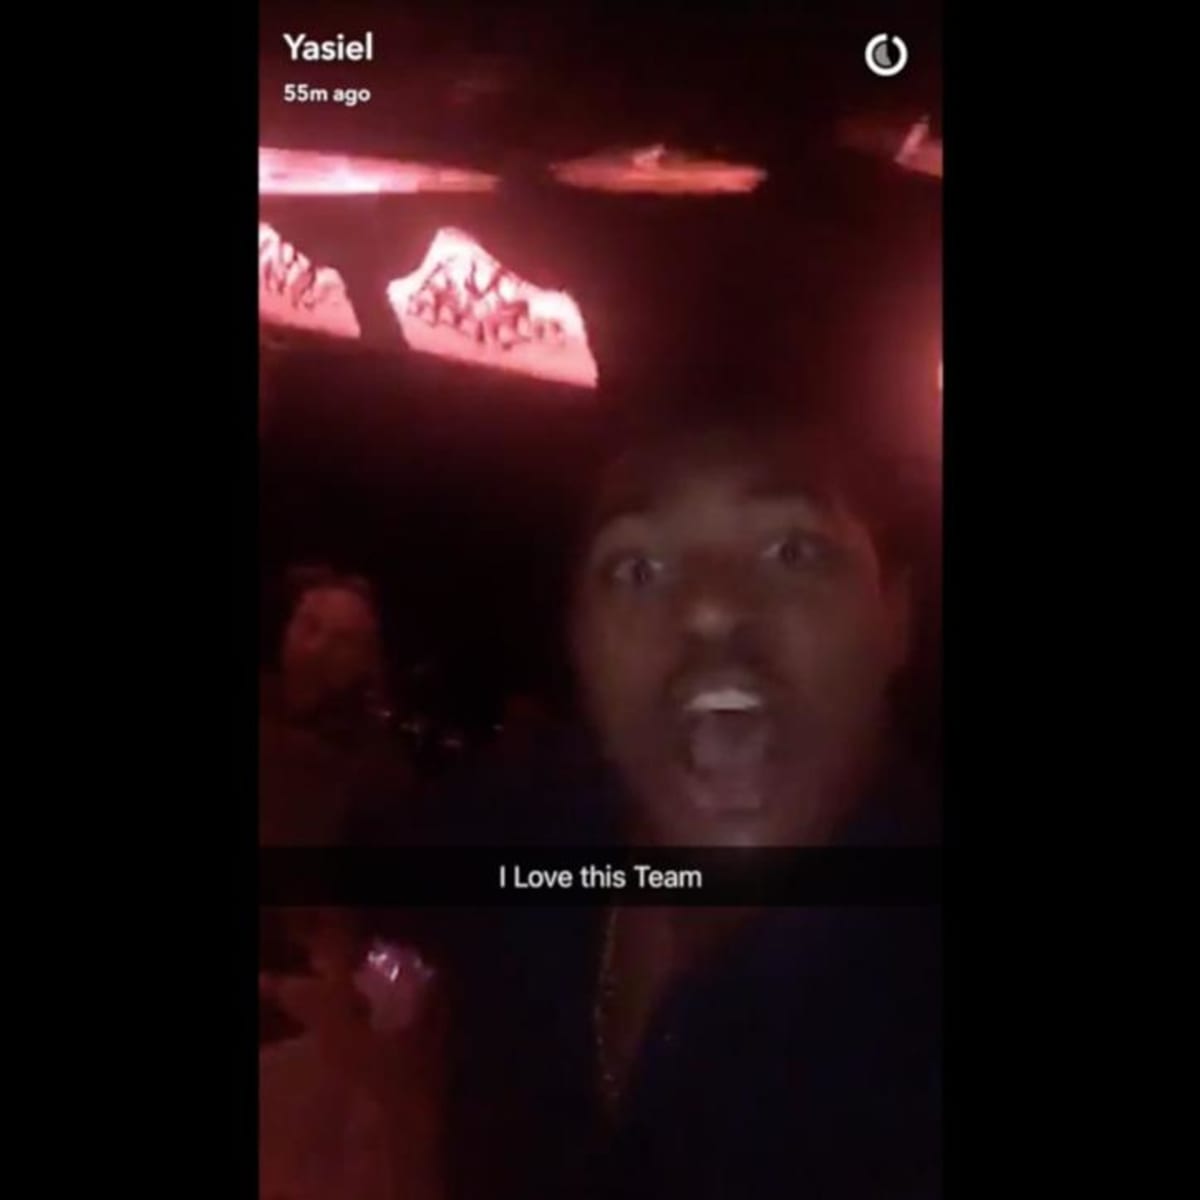 Dodgers' Yasiel Puig posts videos partying with Triple-A teammates